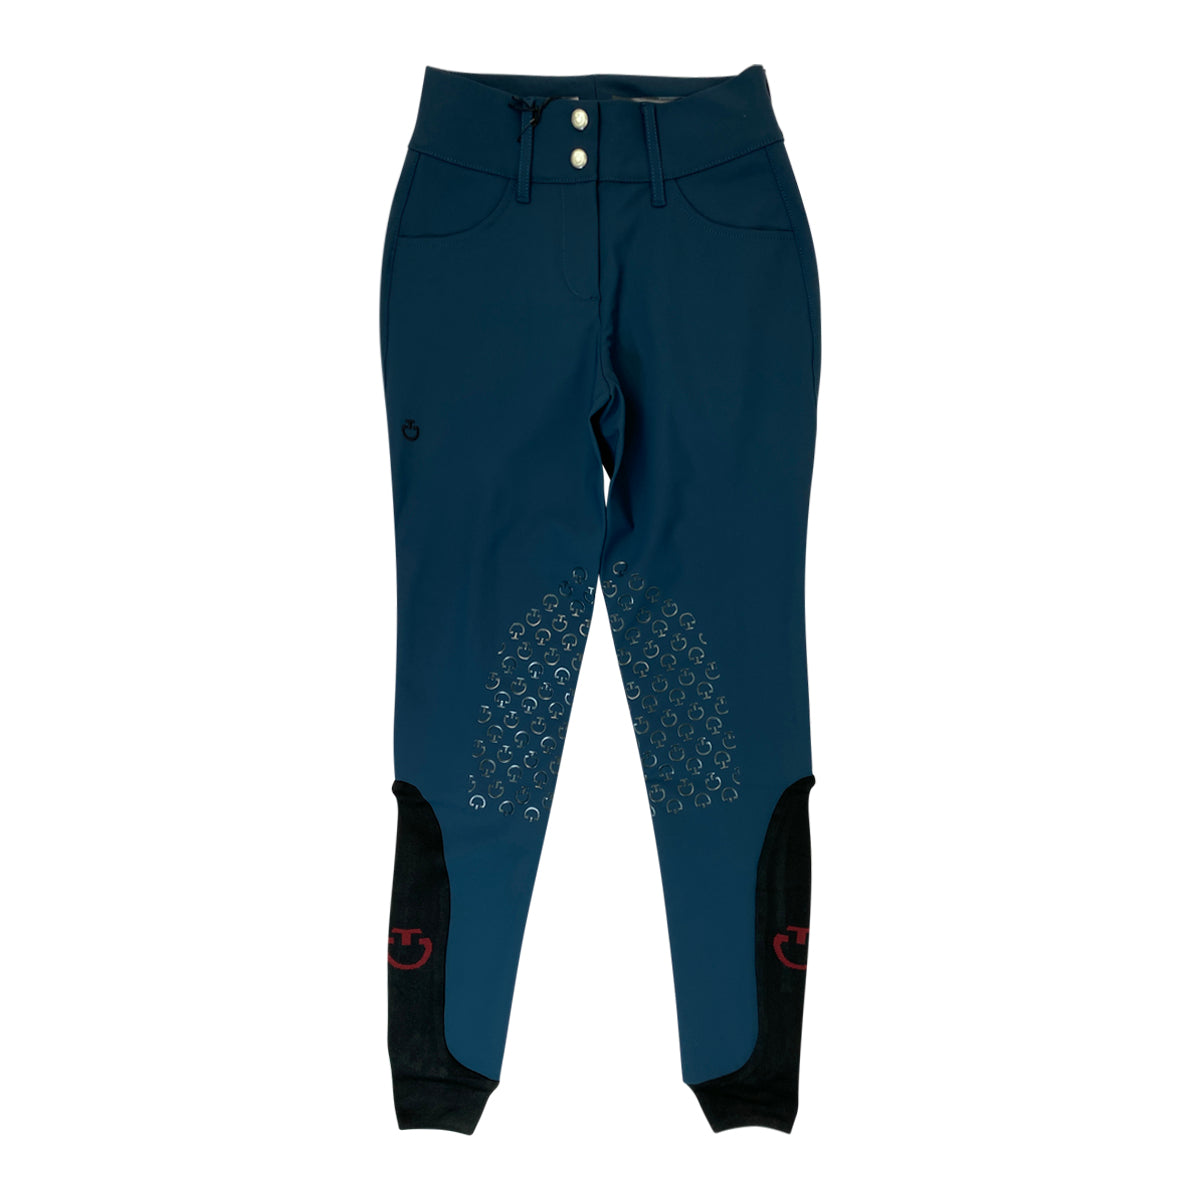 Cavalleria Toscana 'American' High Rise Jumping Breeches in Navy 